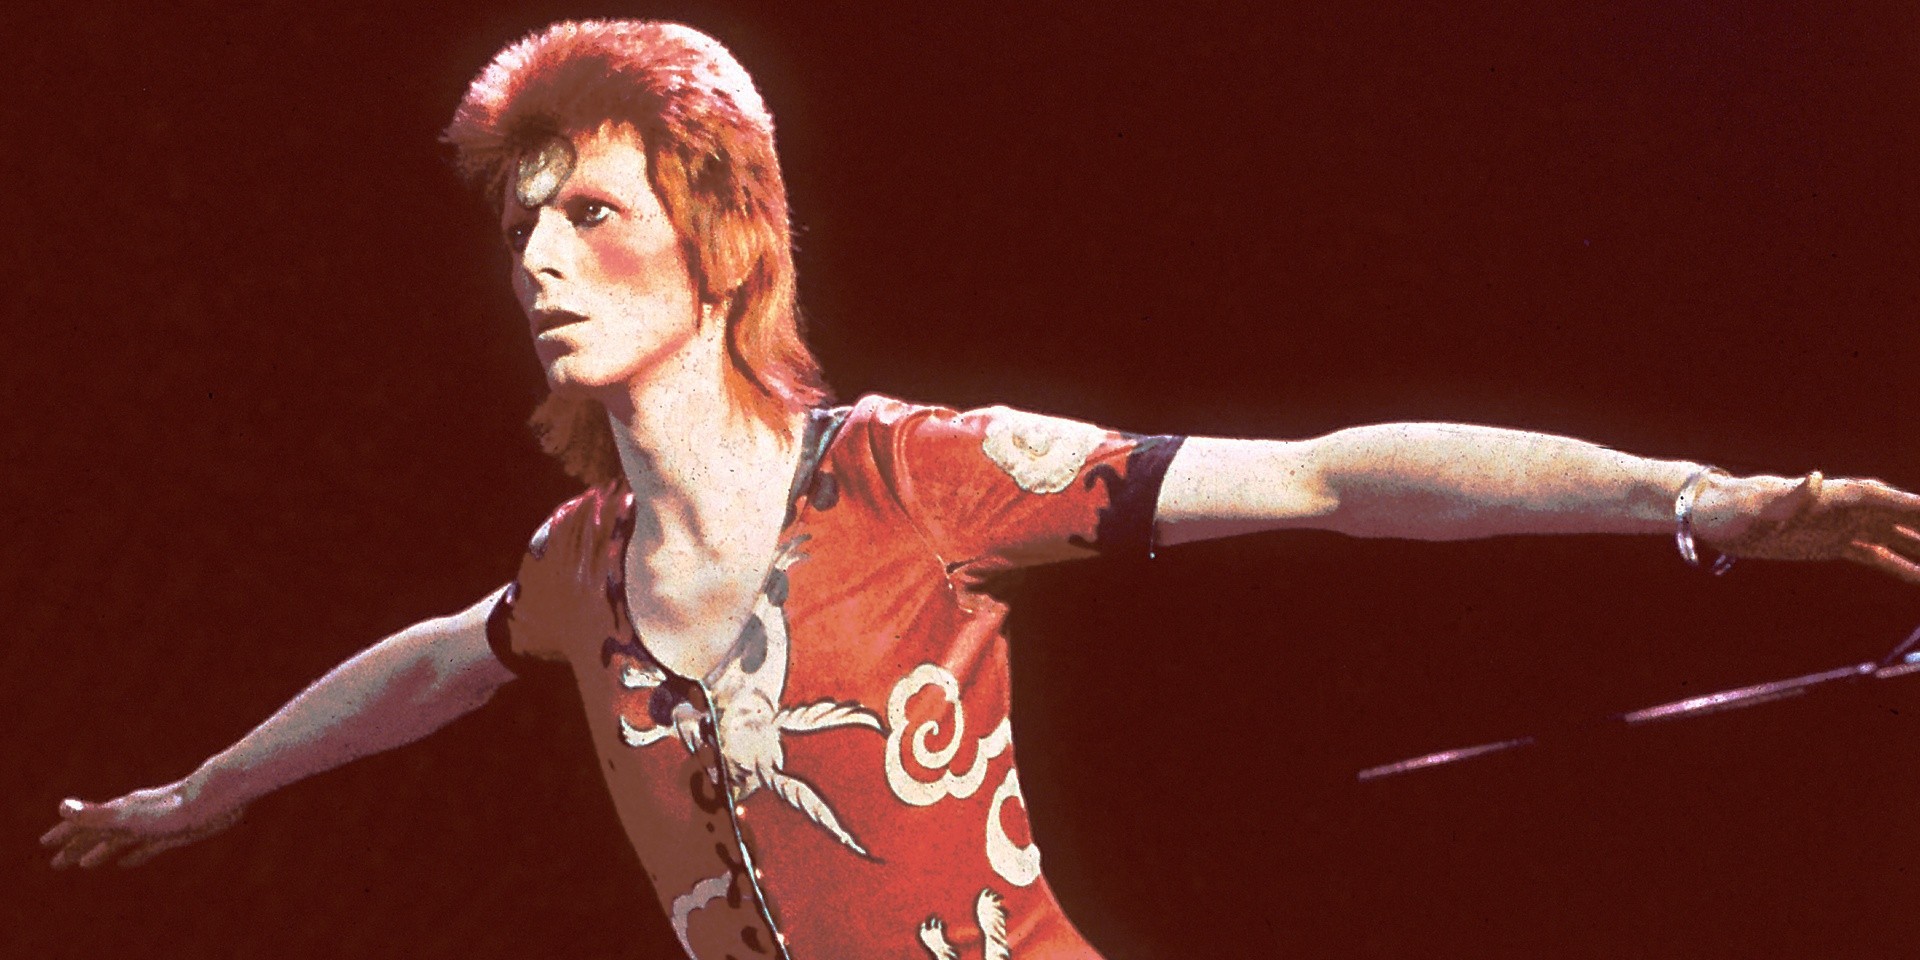 Essentials: David Bowie's The Rise and Fall of Ziggy Stardust and the Spiders from Mars (1972)